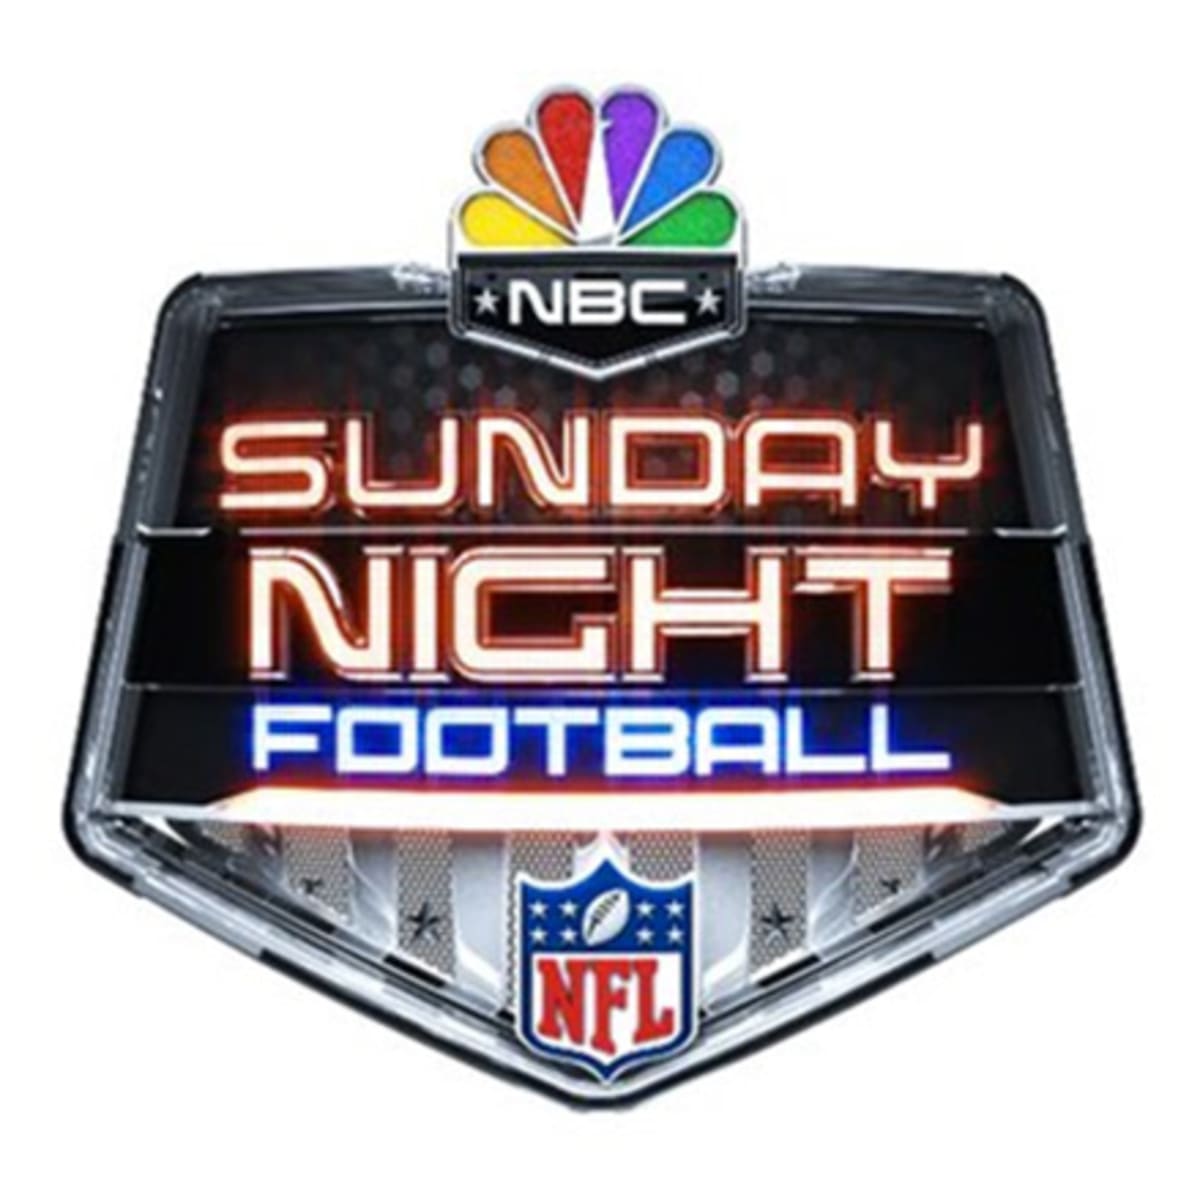 which nfl teams play thursday night football tonight